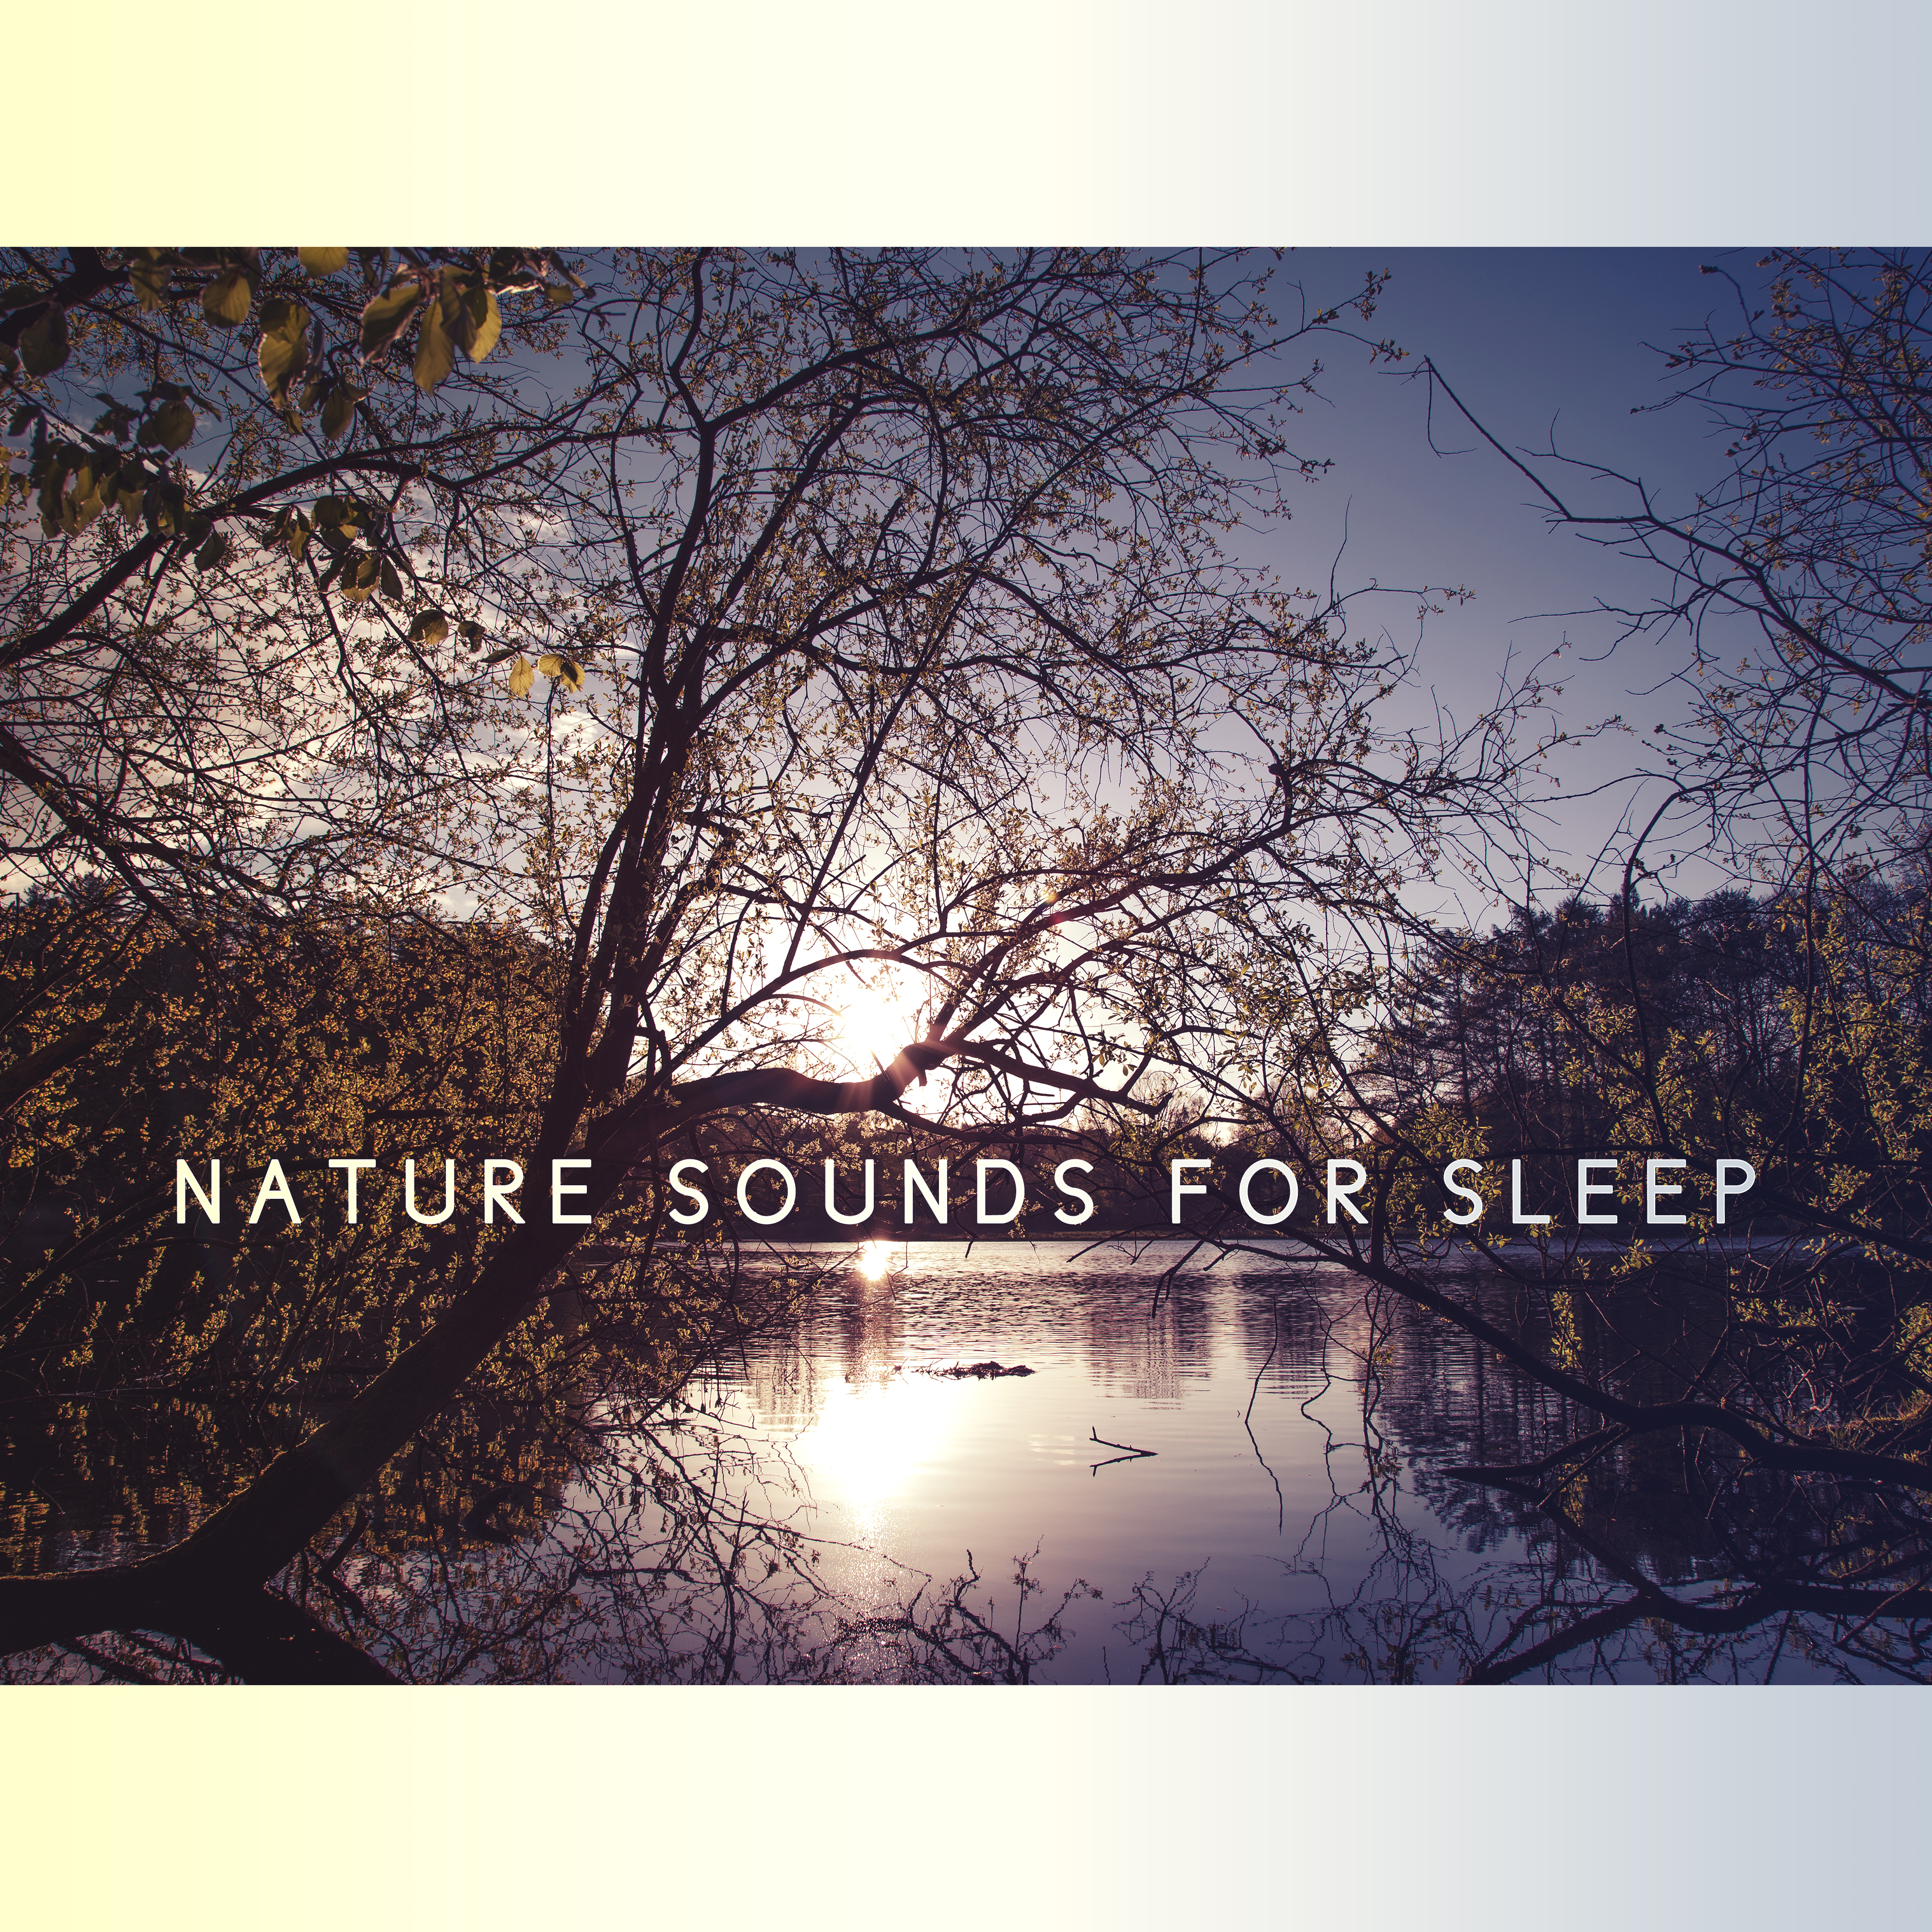 Nature Sounds for Sleep – Relaxation Bedtime, Stress Relief, Deep Dreams, Soothing Music at Goodnight, Sweet Nap, Calming Melodies to Bed, Restful Sleep